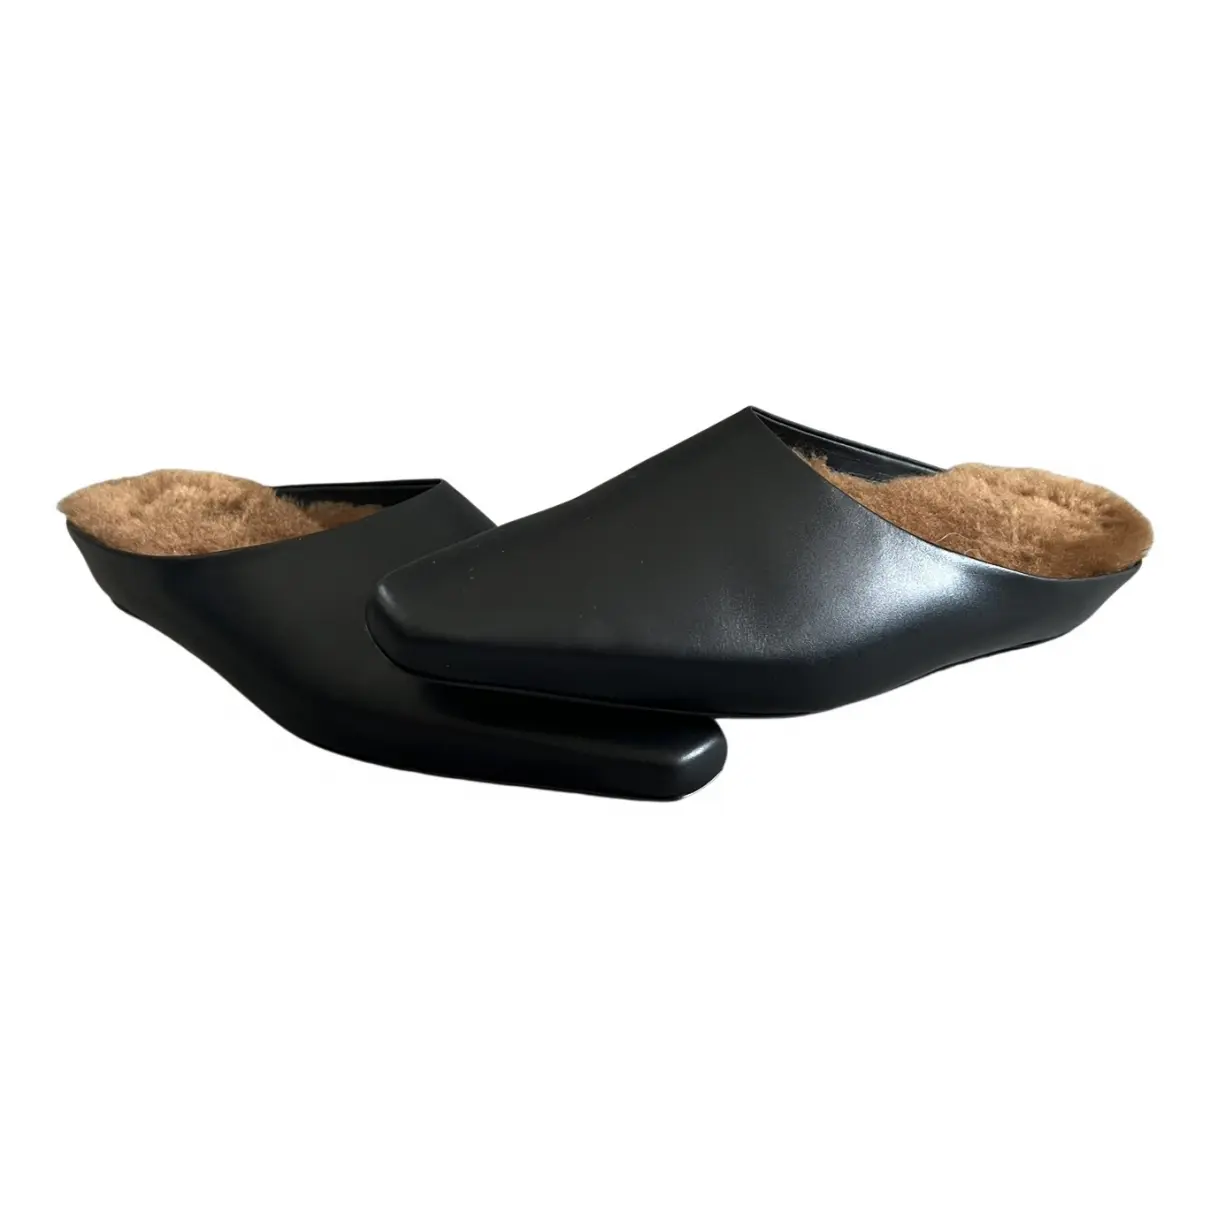 Pony-style calfskin mules & clogs